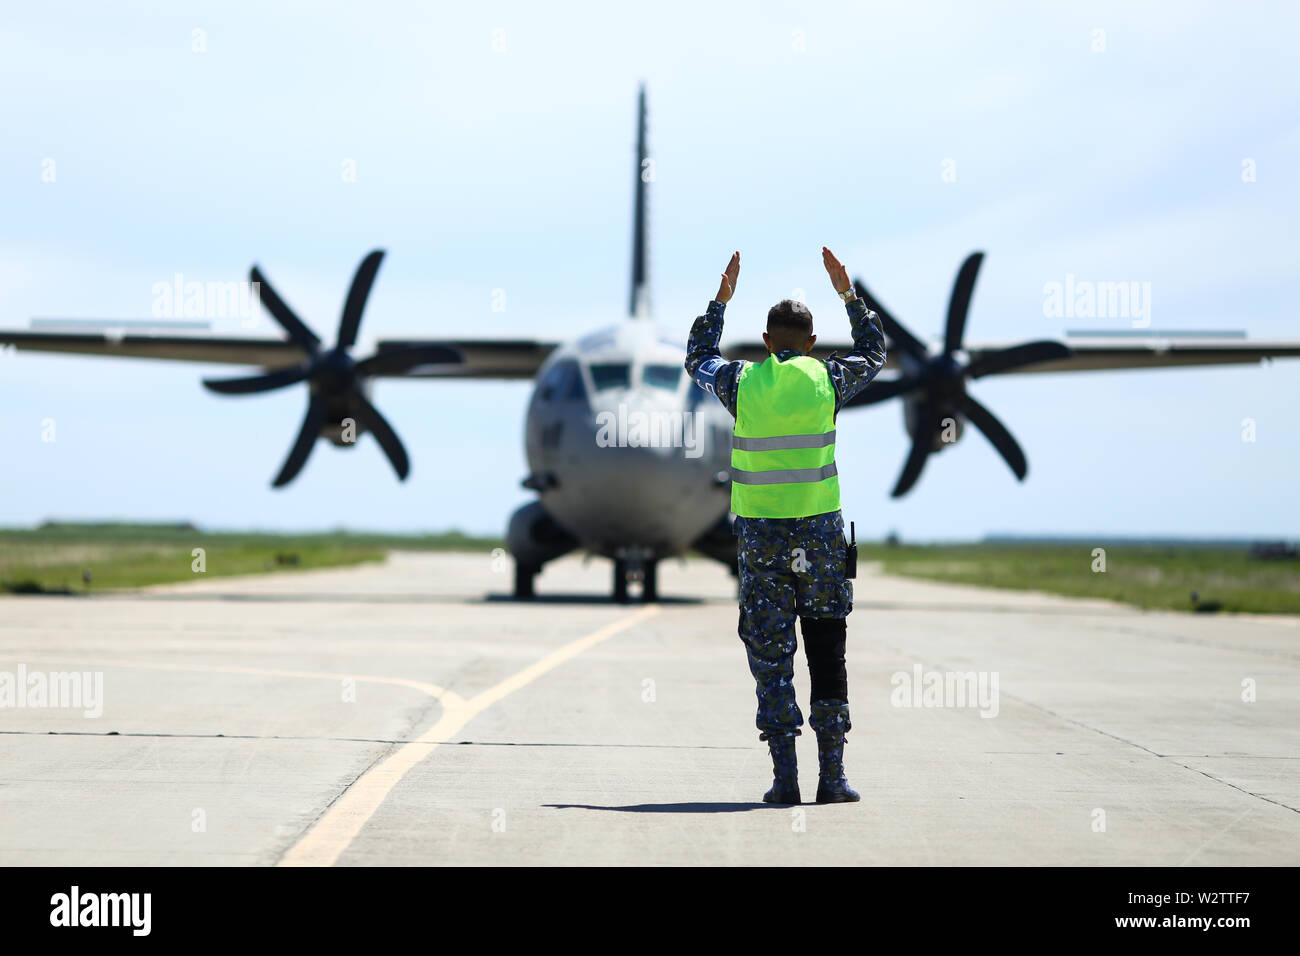 Boboc, Romania - May 22, 2019: Ground personnel is aircraft marshalling an Alenia C-27J Spartan military cargo plane from the Bulgarian Air Force that Stock Photo